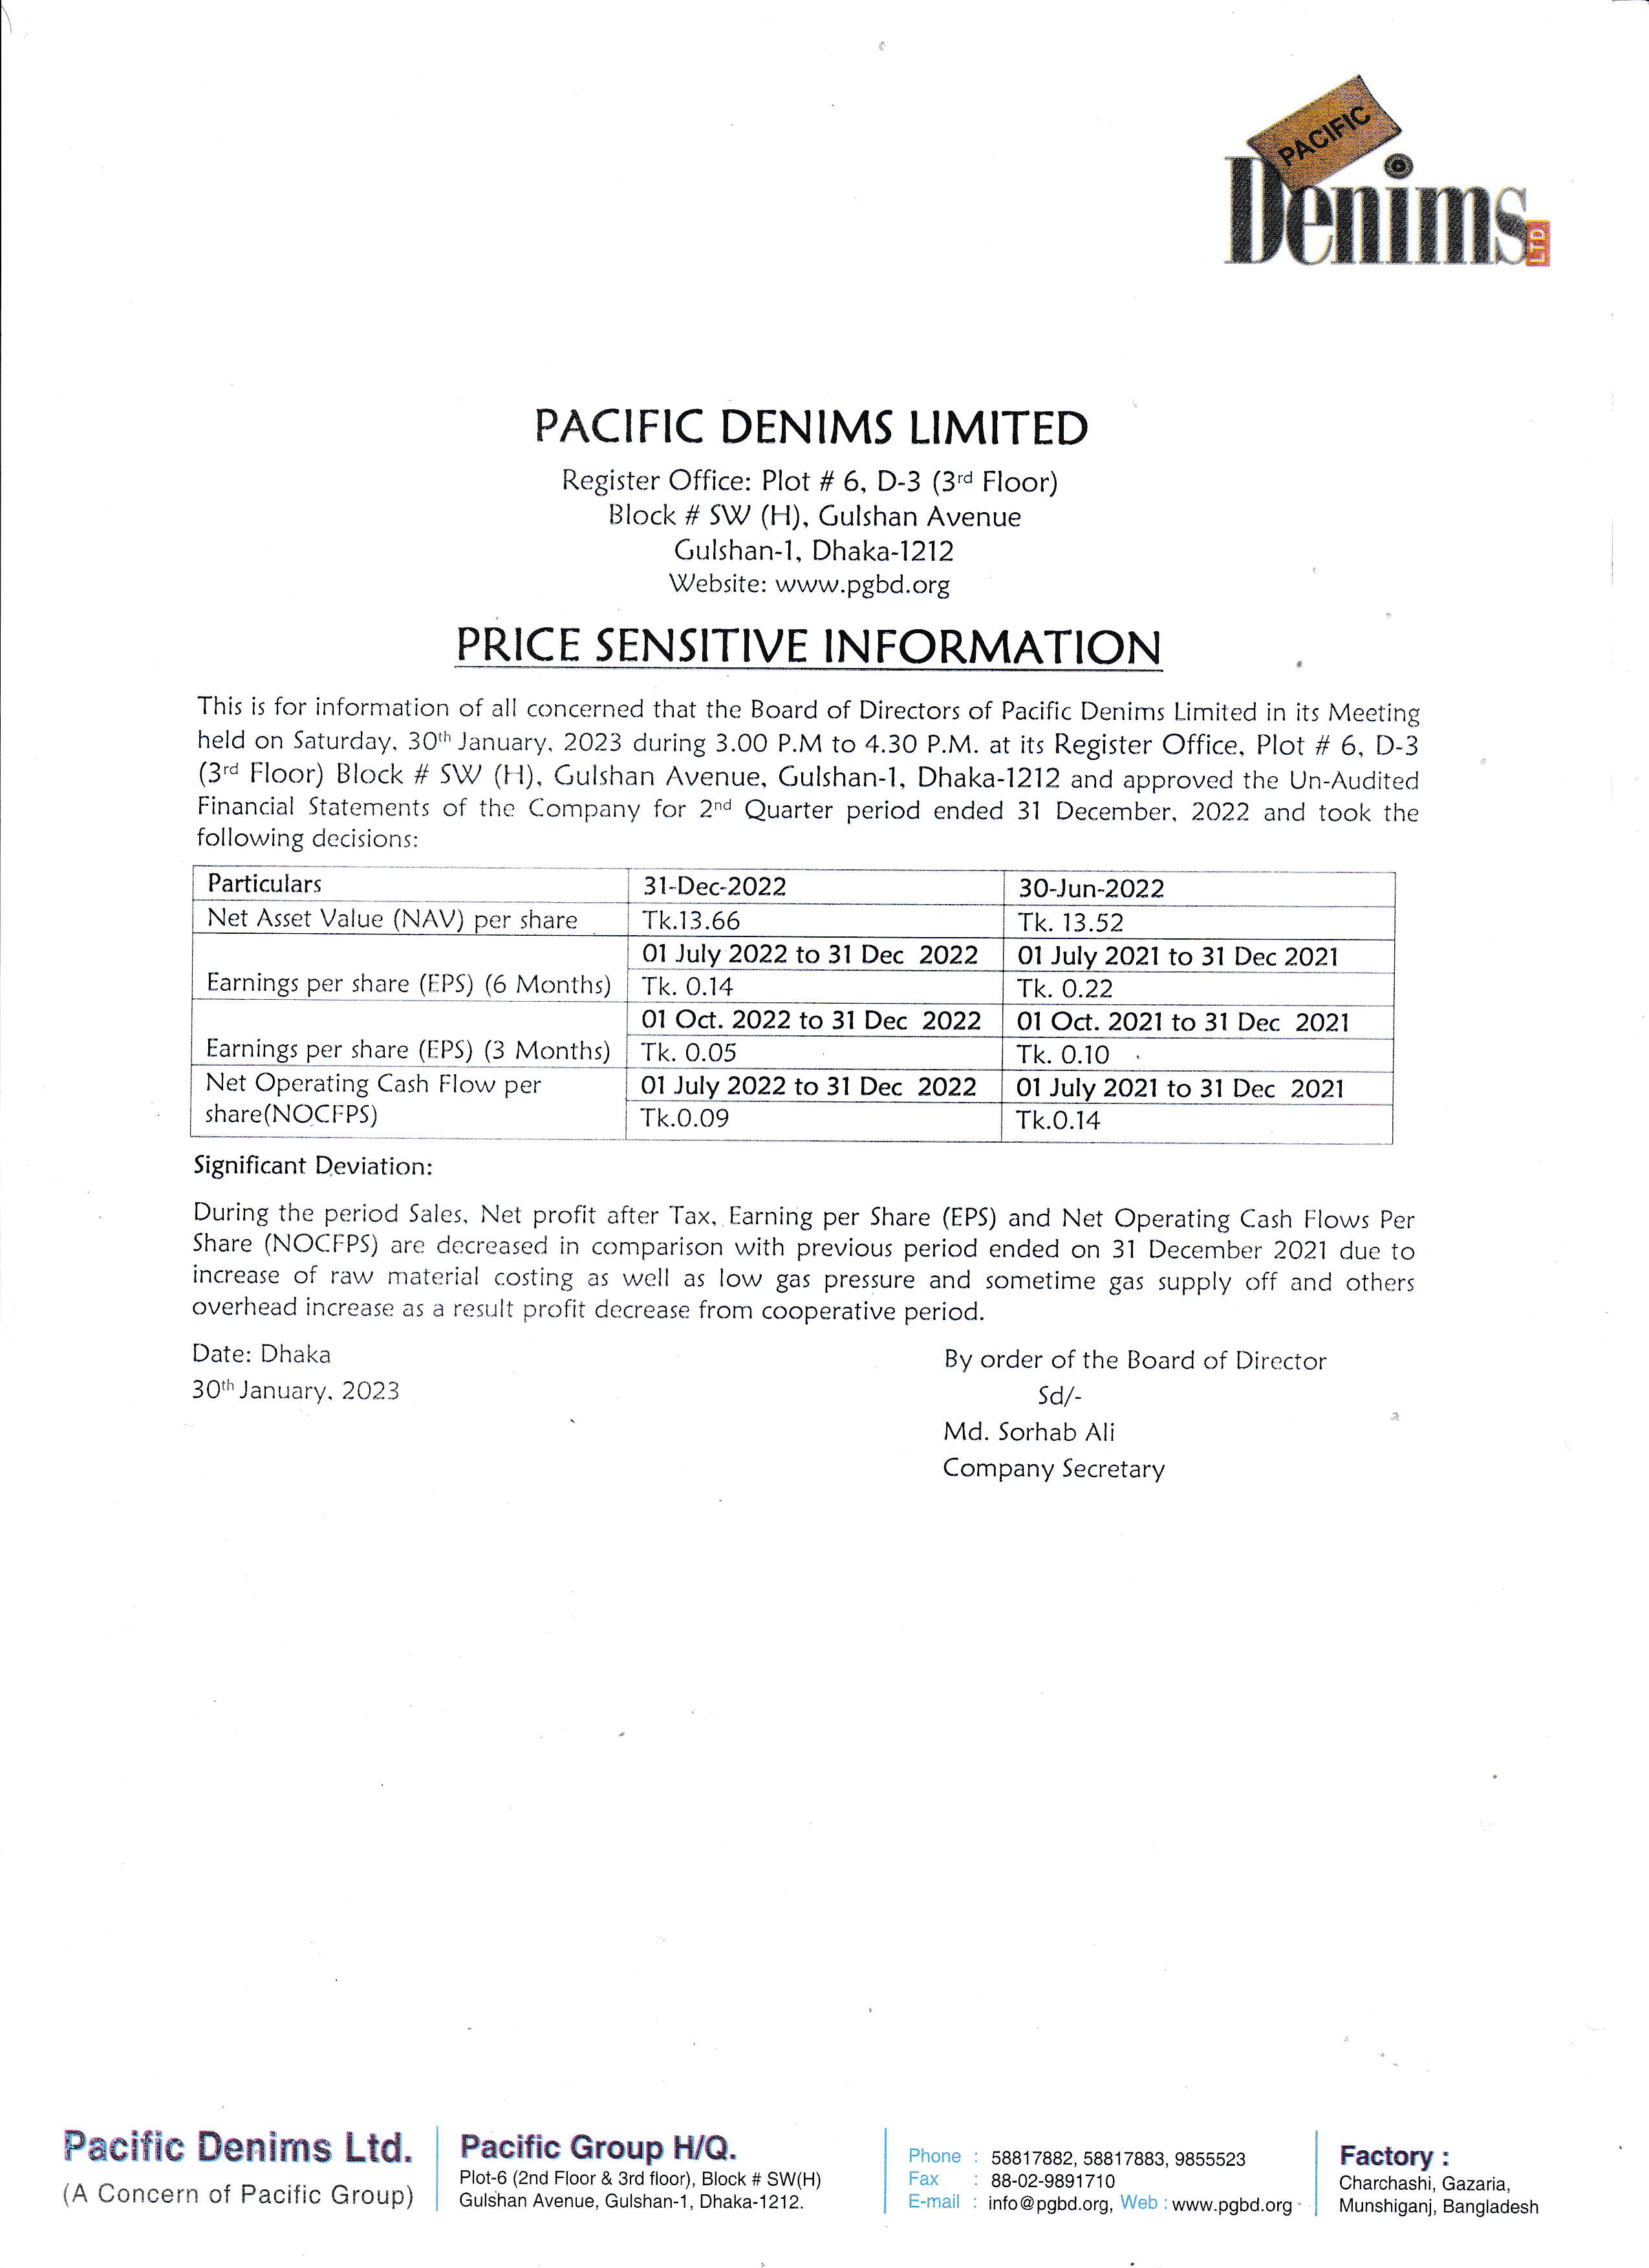 Un-Audited Half yearly (Q2) Financial Statements of Pacific Denims Ltd